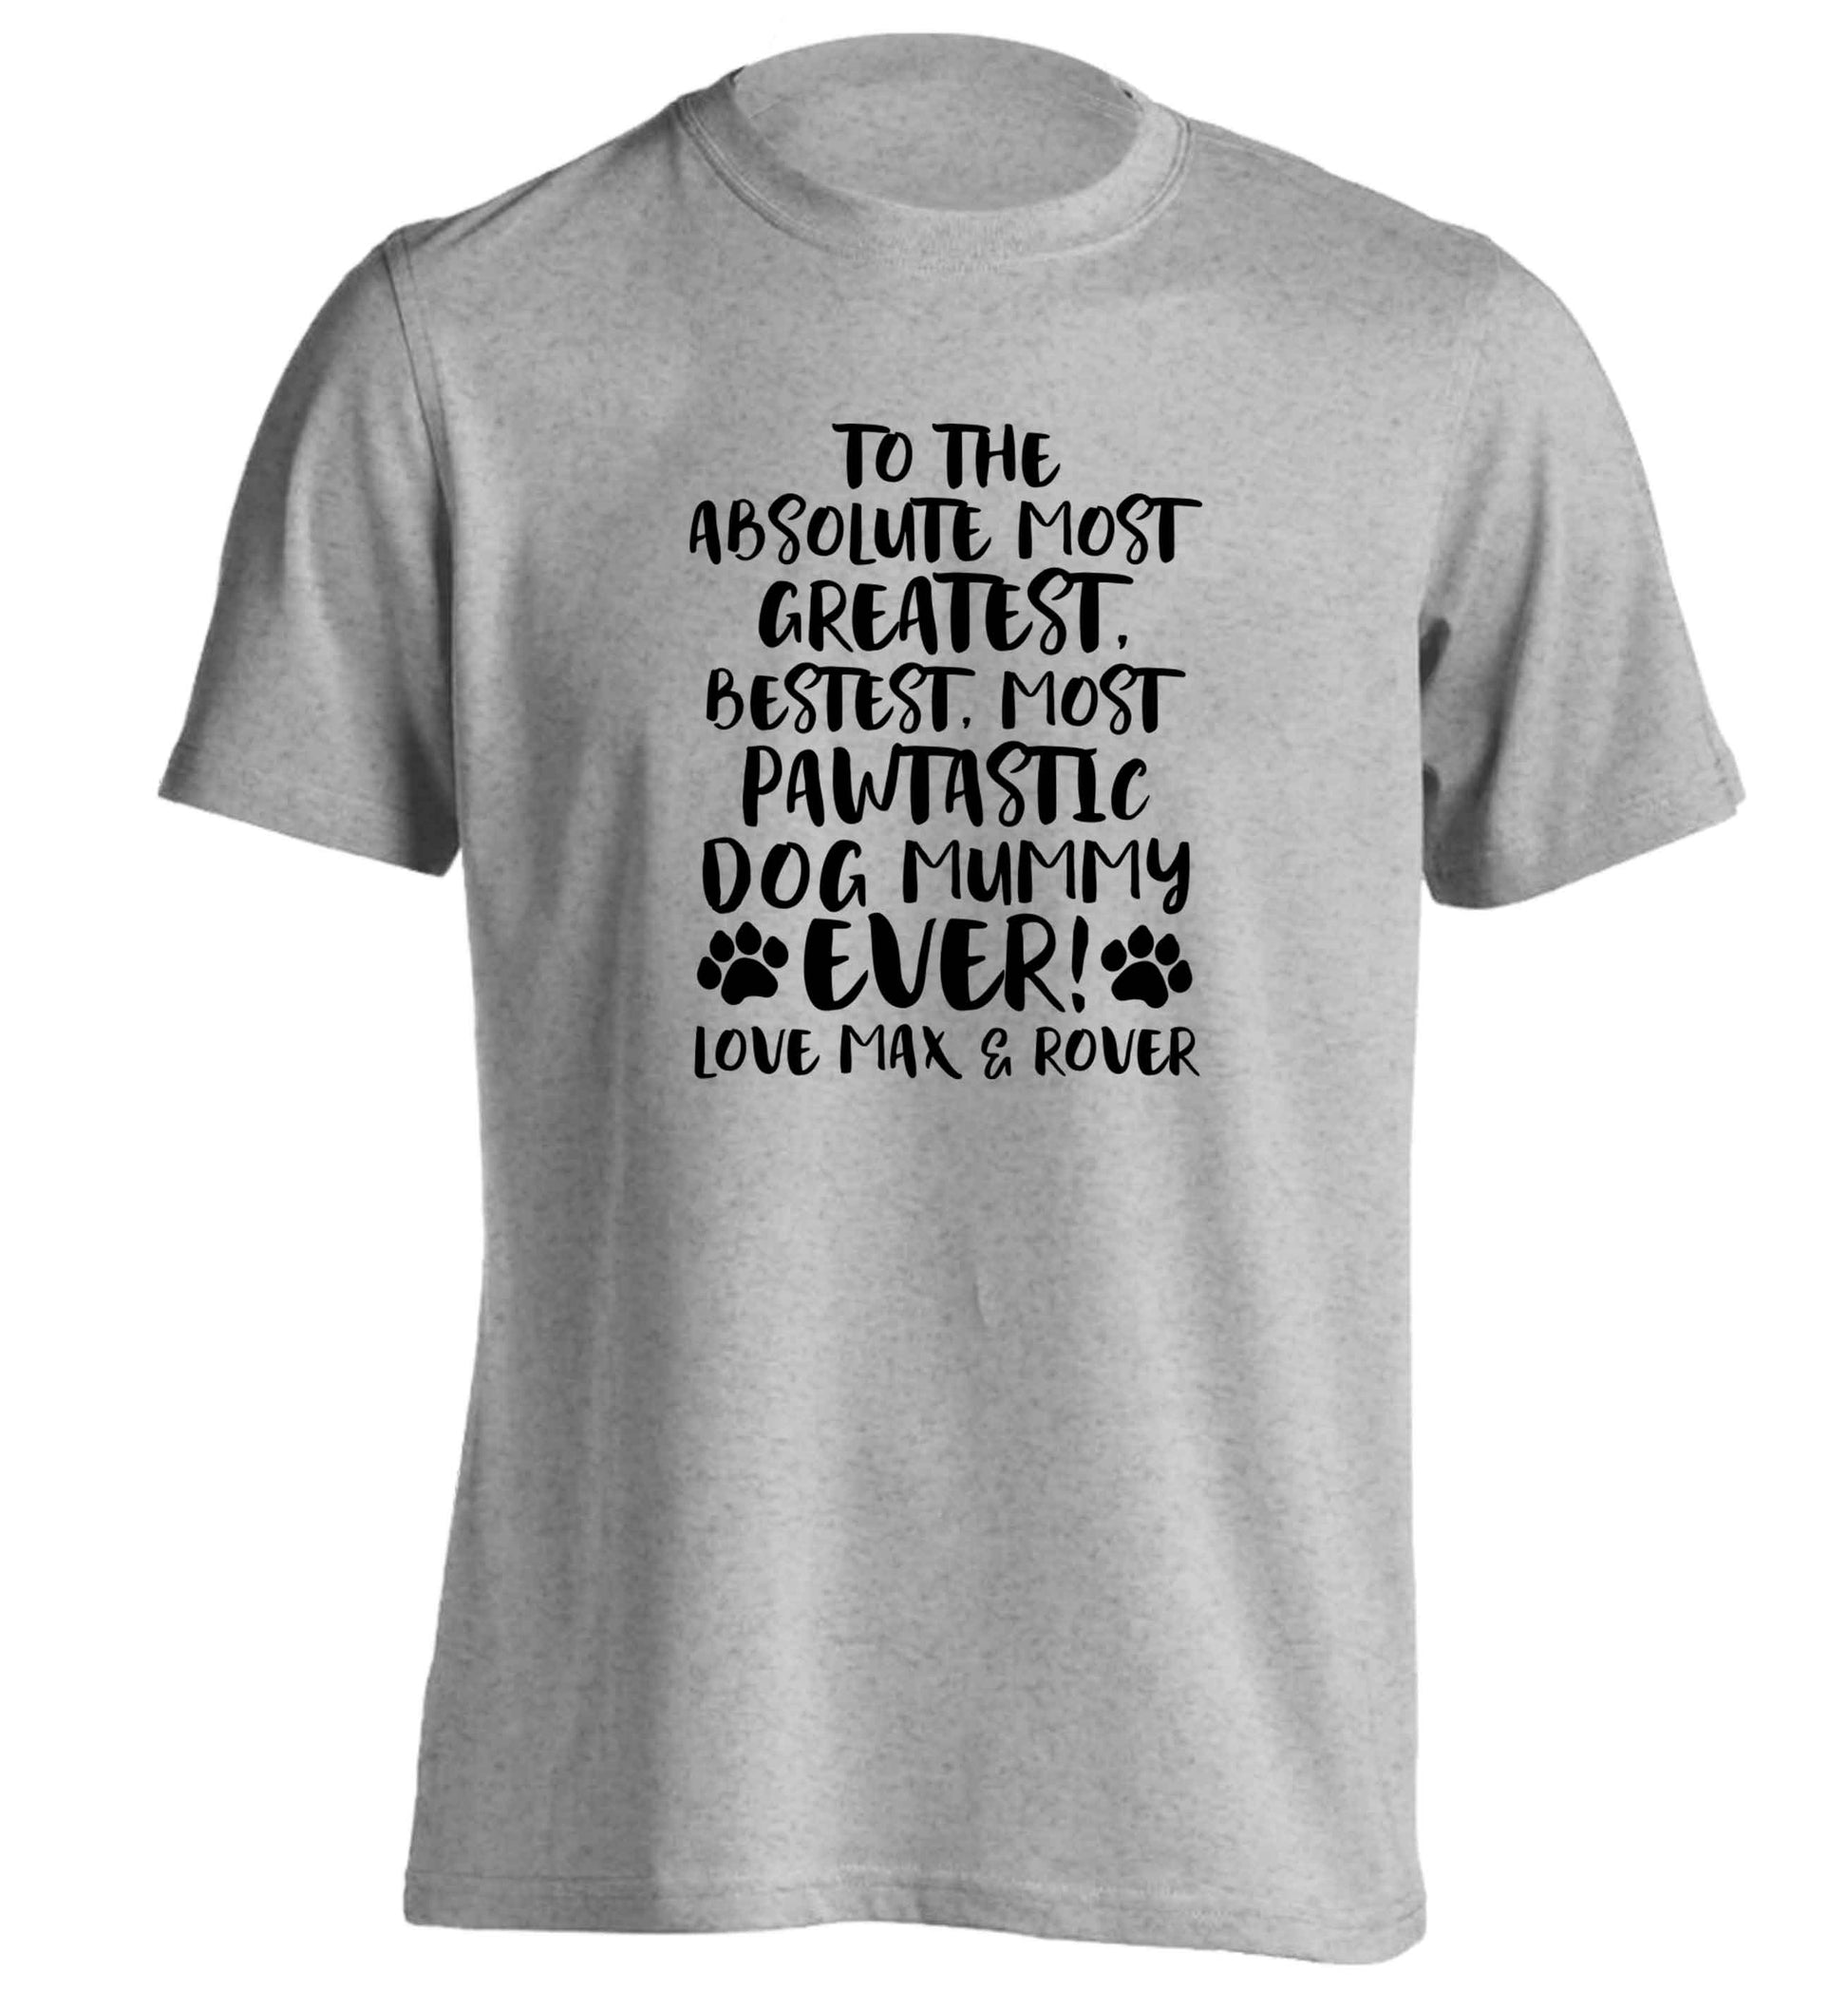 Personalsied to the most pawtastic dog mummy ever adults unisex grey Tshirt 2XL